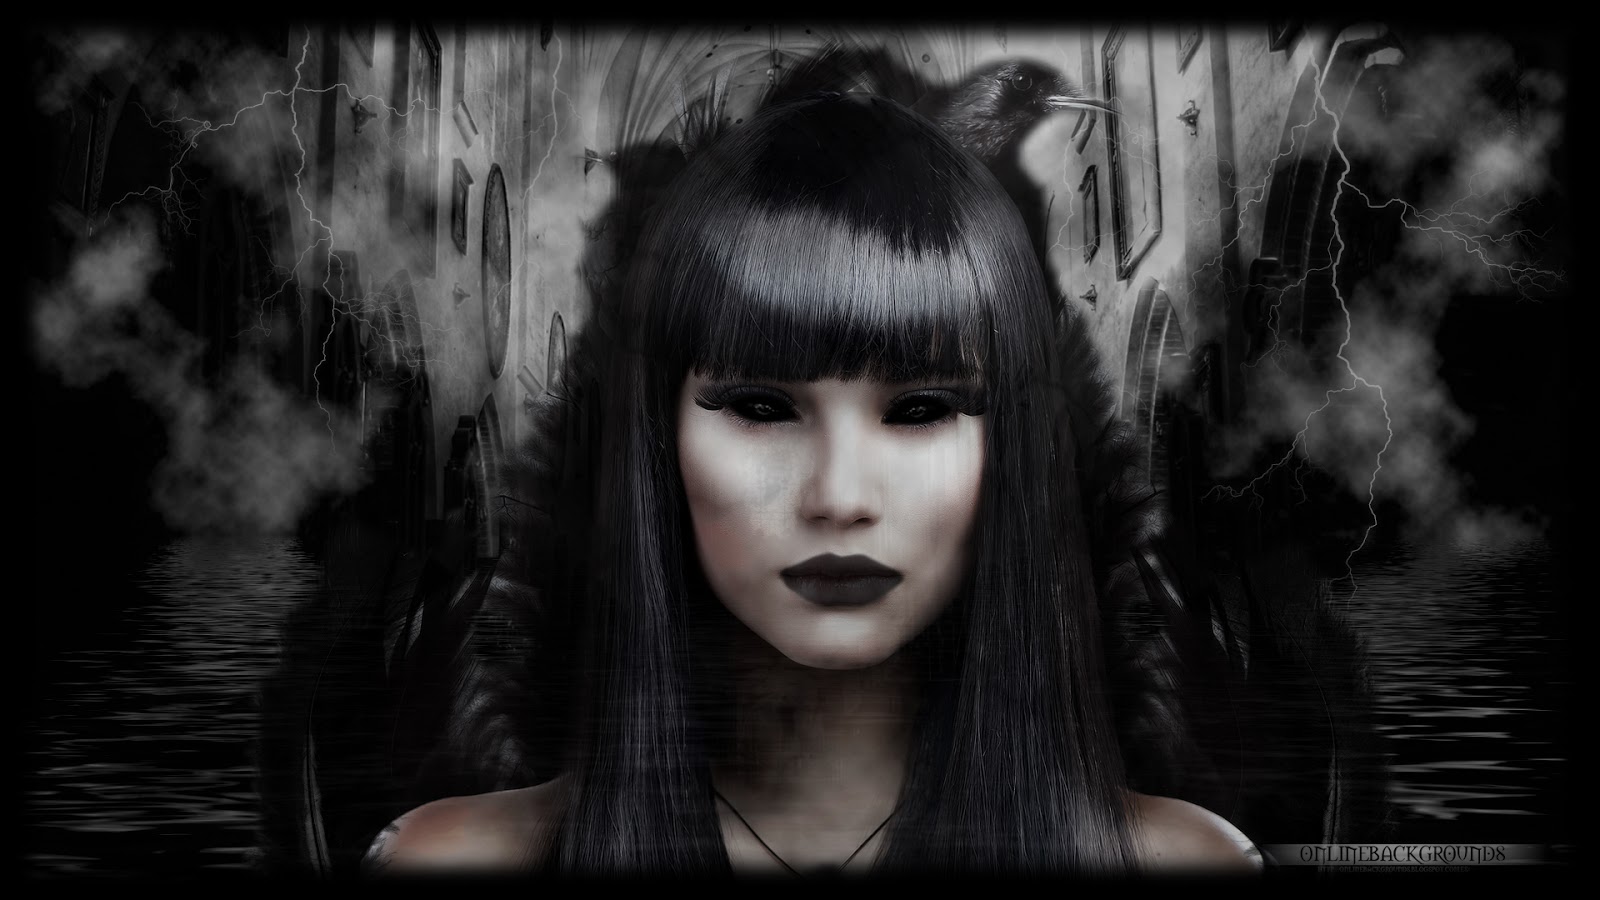 Onlinebackgrounds: Gothic Woman PC Wallpaper